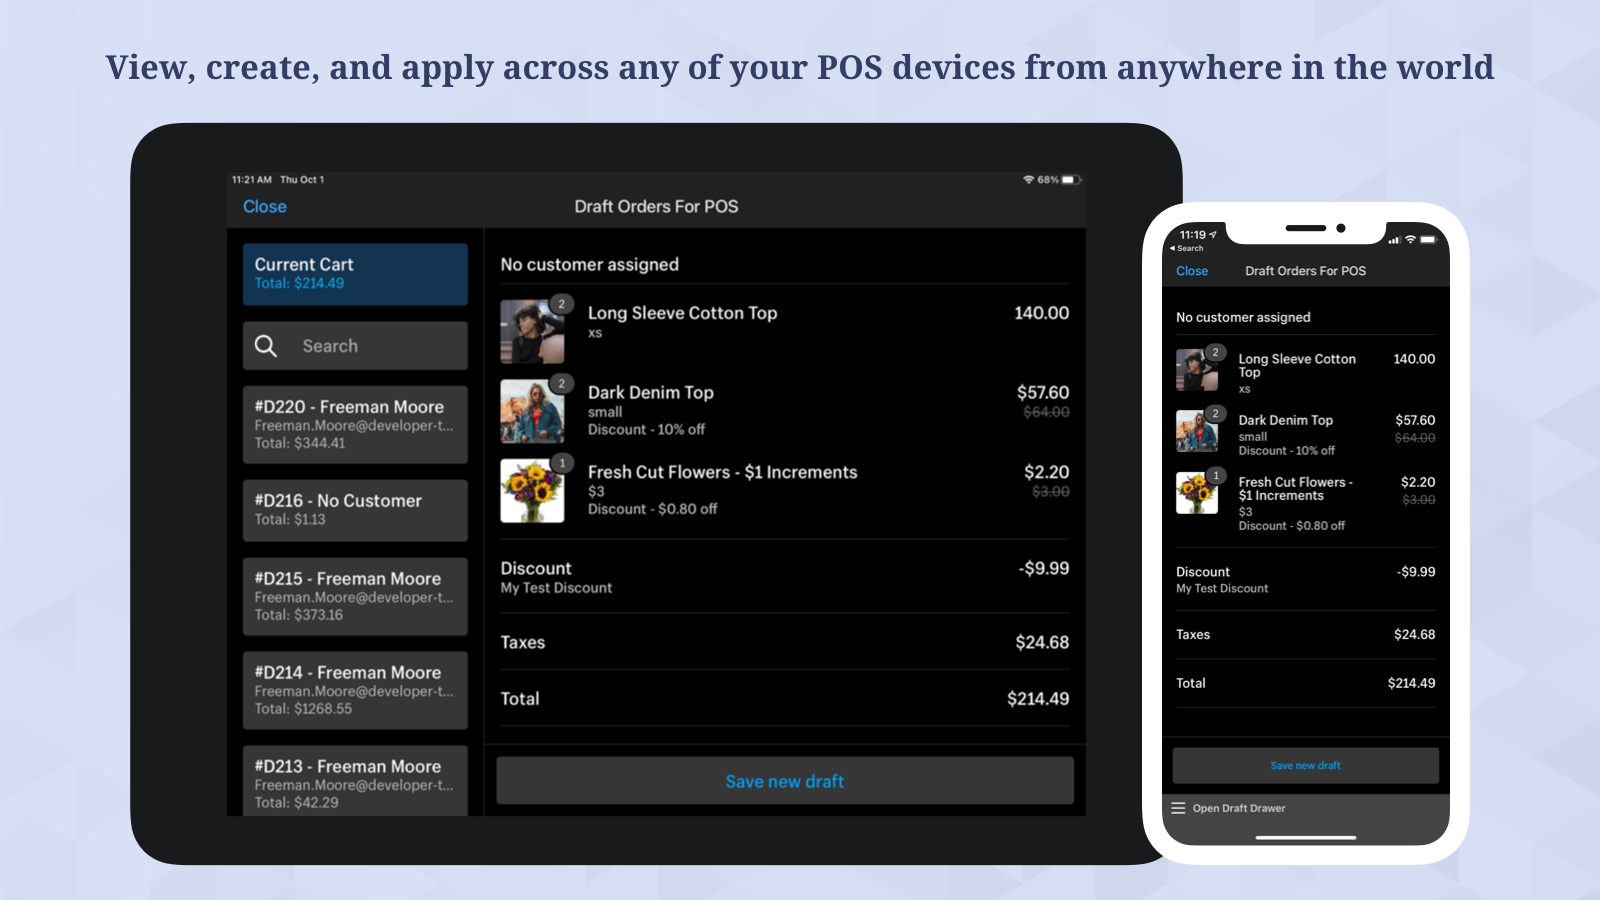 View, create, and apply across any of your POS devices globally